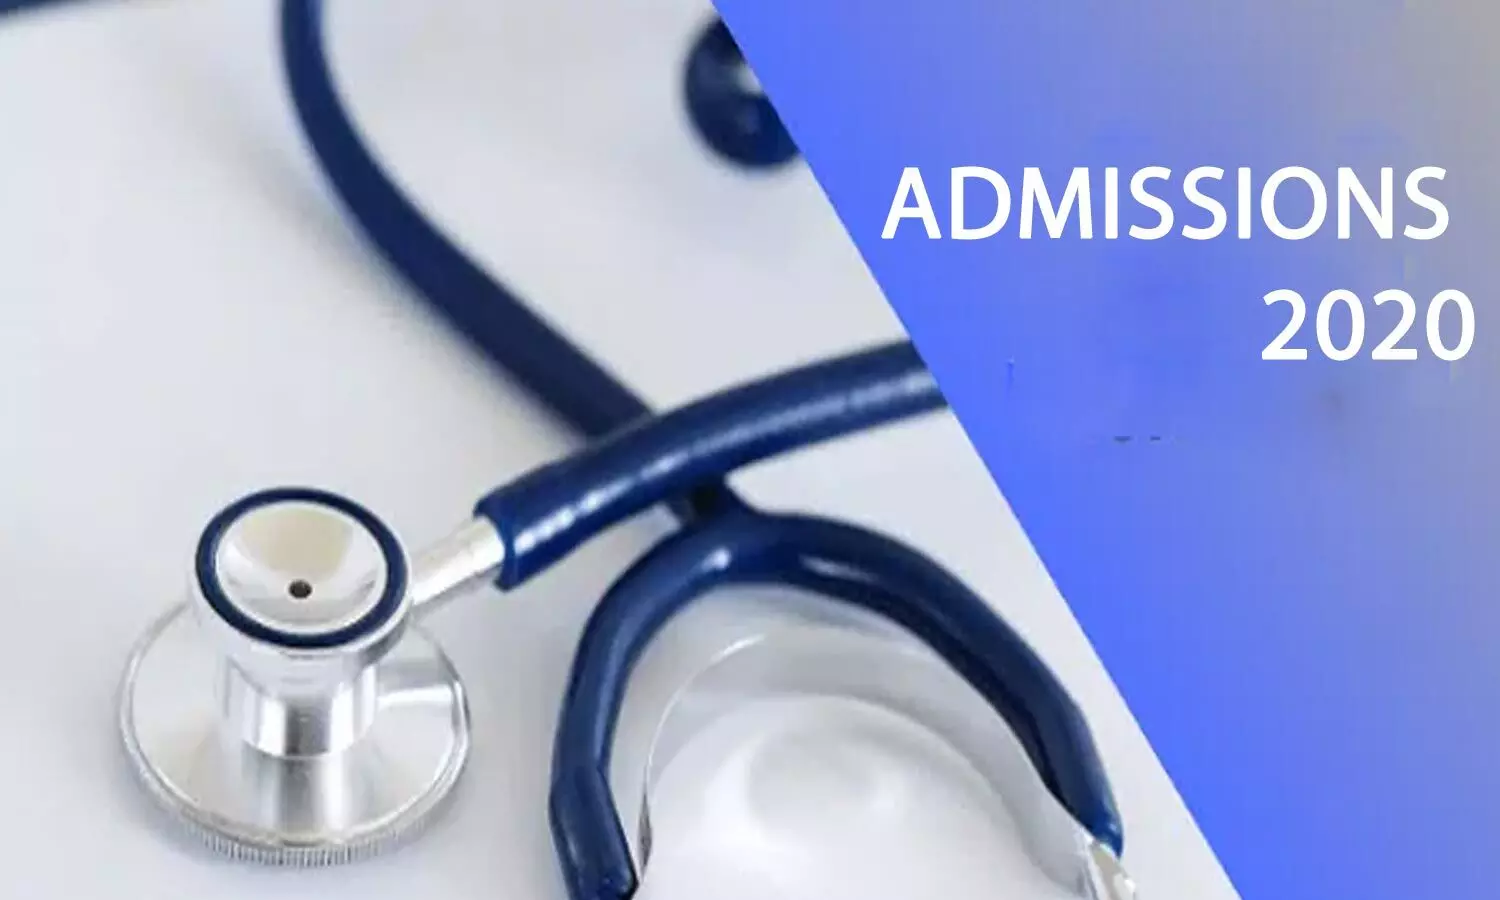 DM, MCh at JIPMER: View eligibility criteria, schedule, application fee details for entrance exam